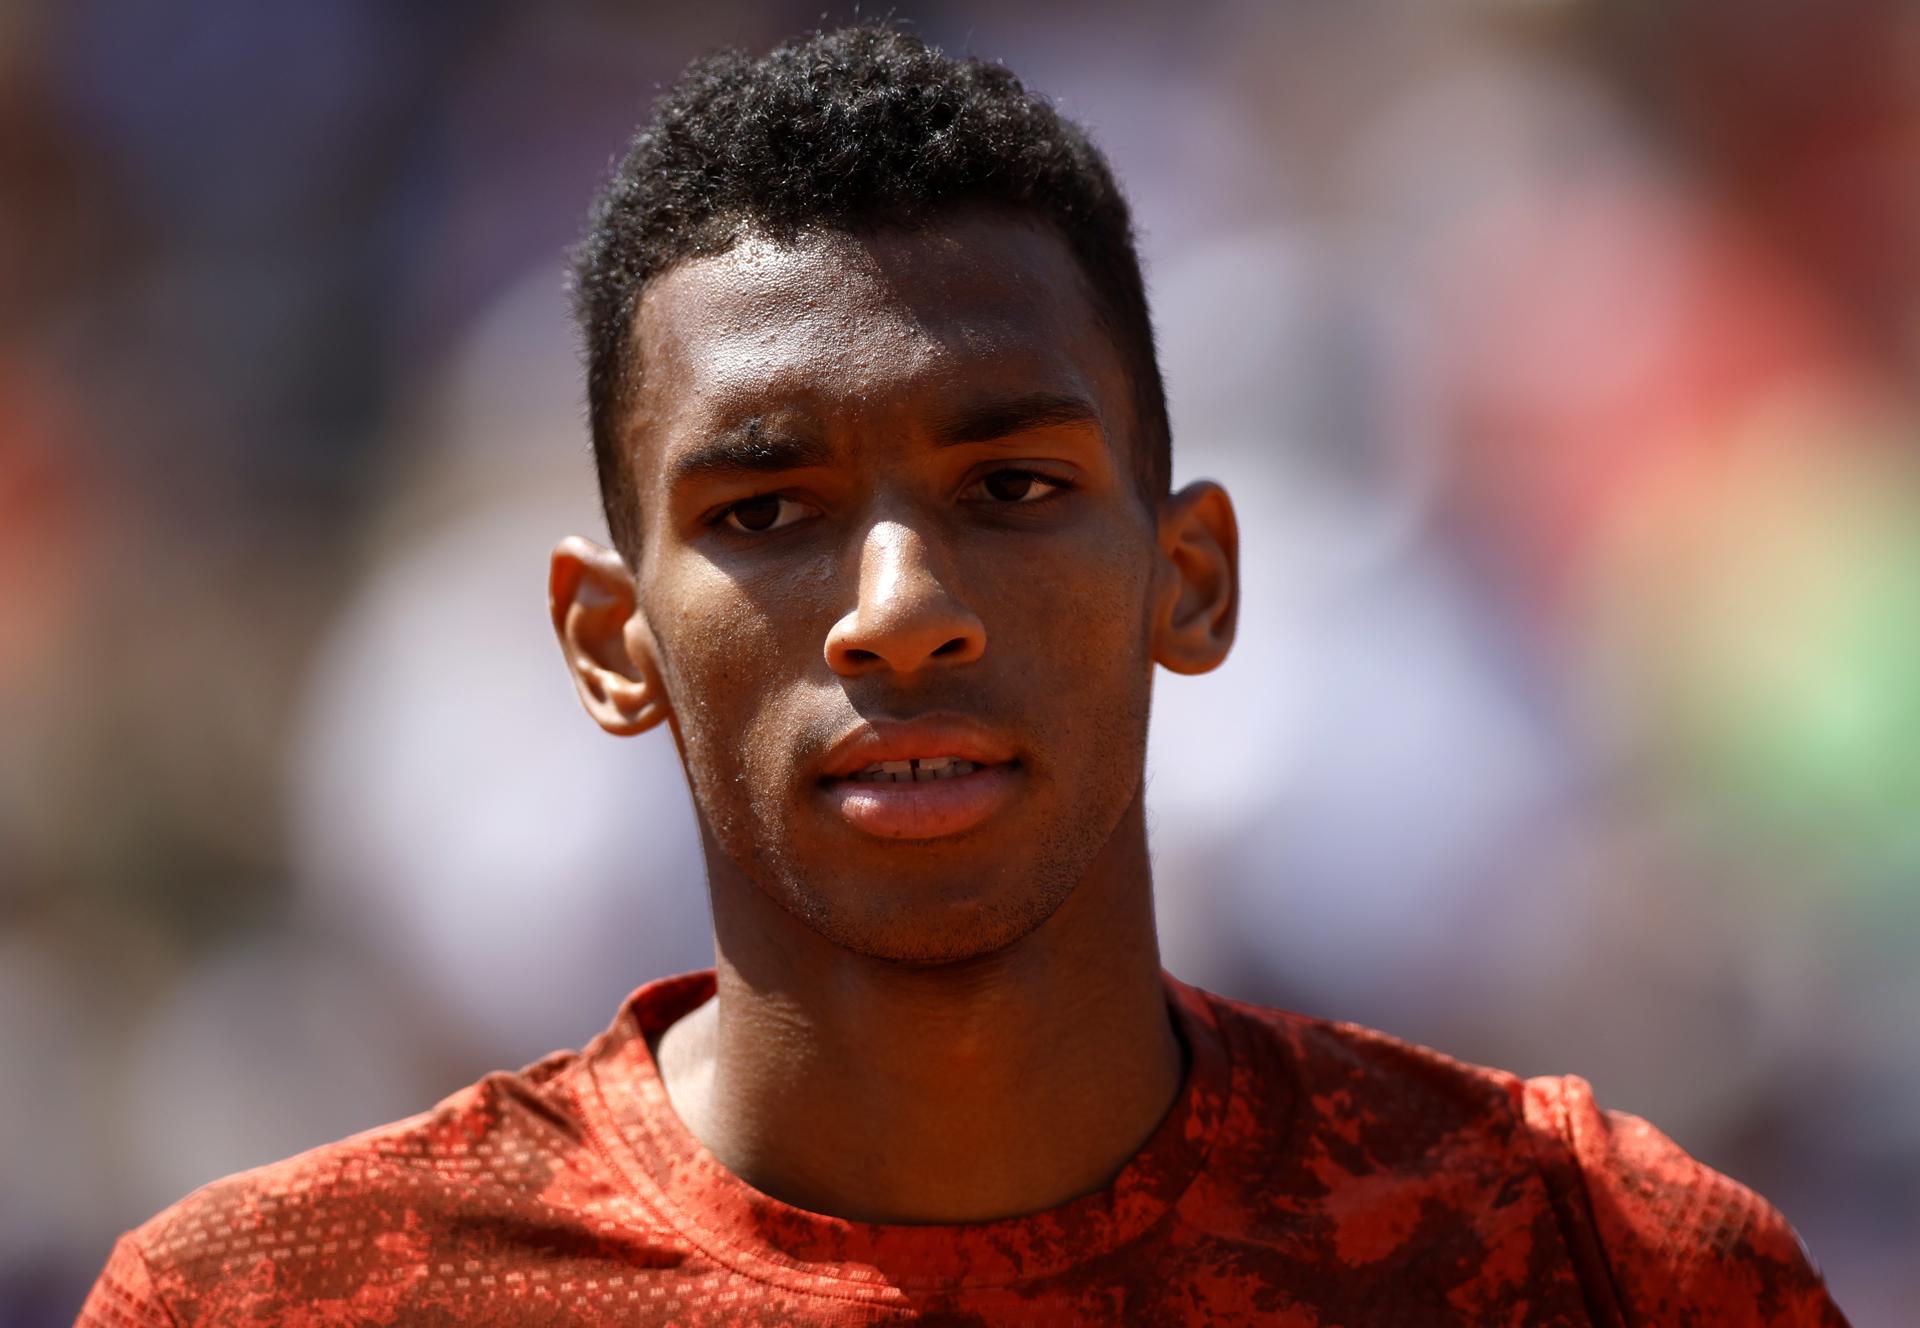 Felix Auger-Aliassime of Canada, the No. 10 seed, reacts during his match against Italy's Fabio Fognini in first-round action at the French Open on 29 May 2023 in Paris, France. Fognini scored a 6-4, 6-4, 6-3 upset. EFE/EPA/YOAN VALAT
